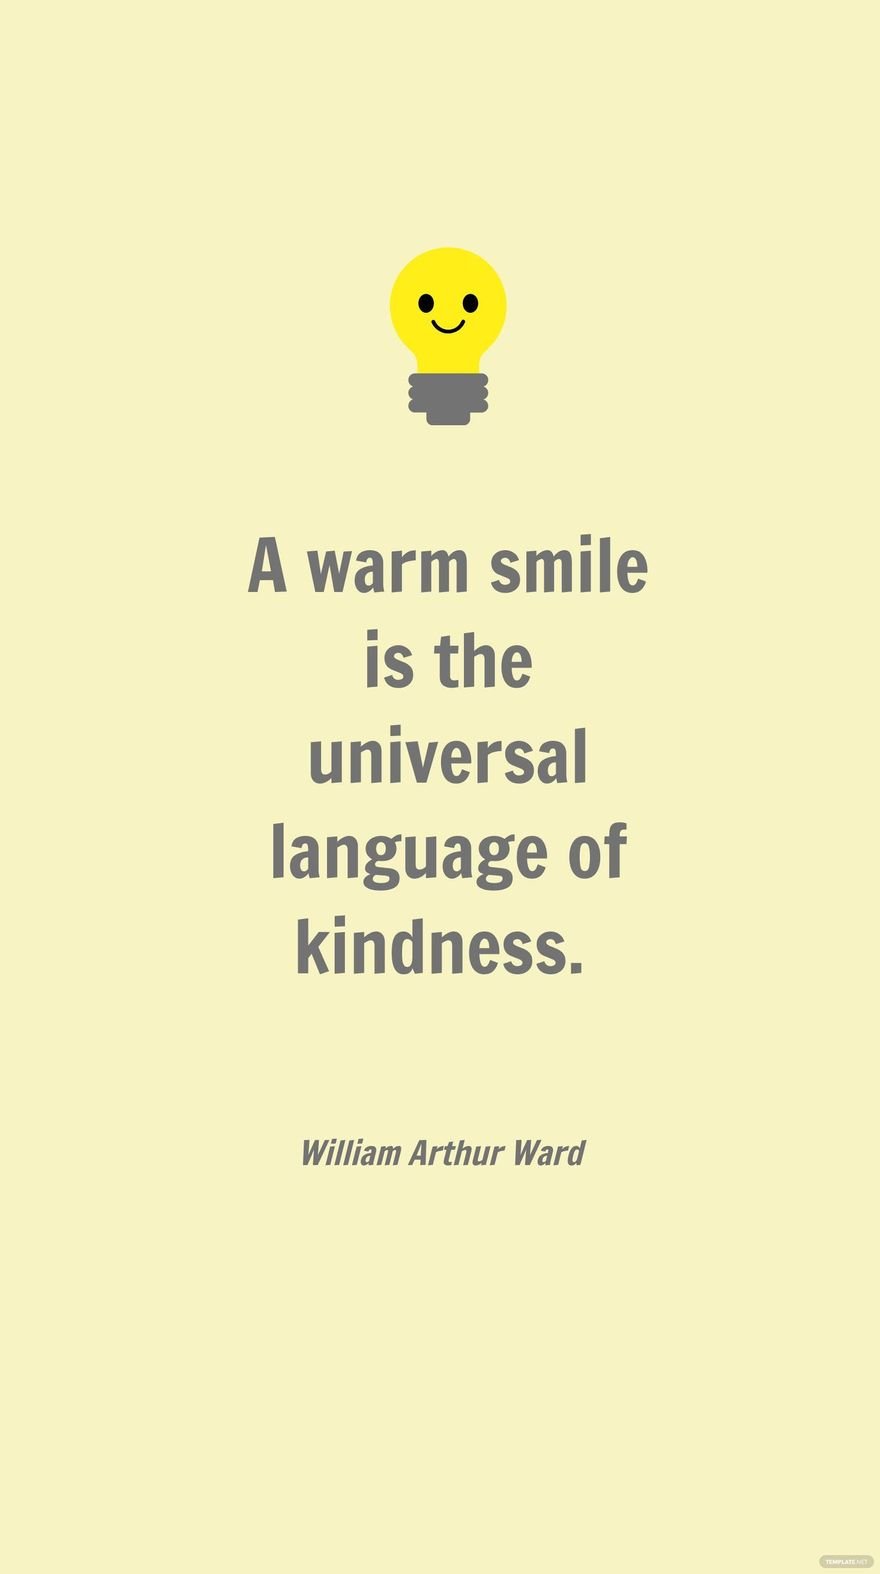 William Arthur Ward - A warm smile is the universal language of kindness. in JPG